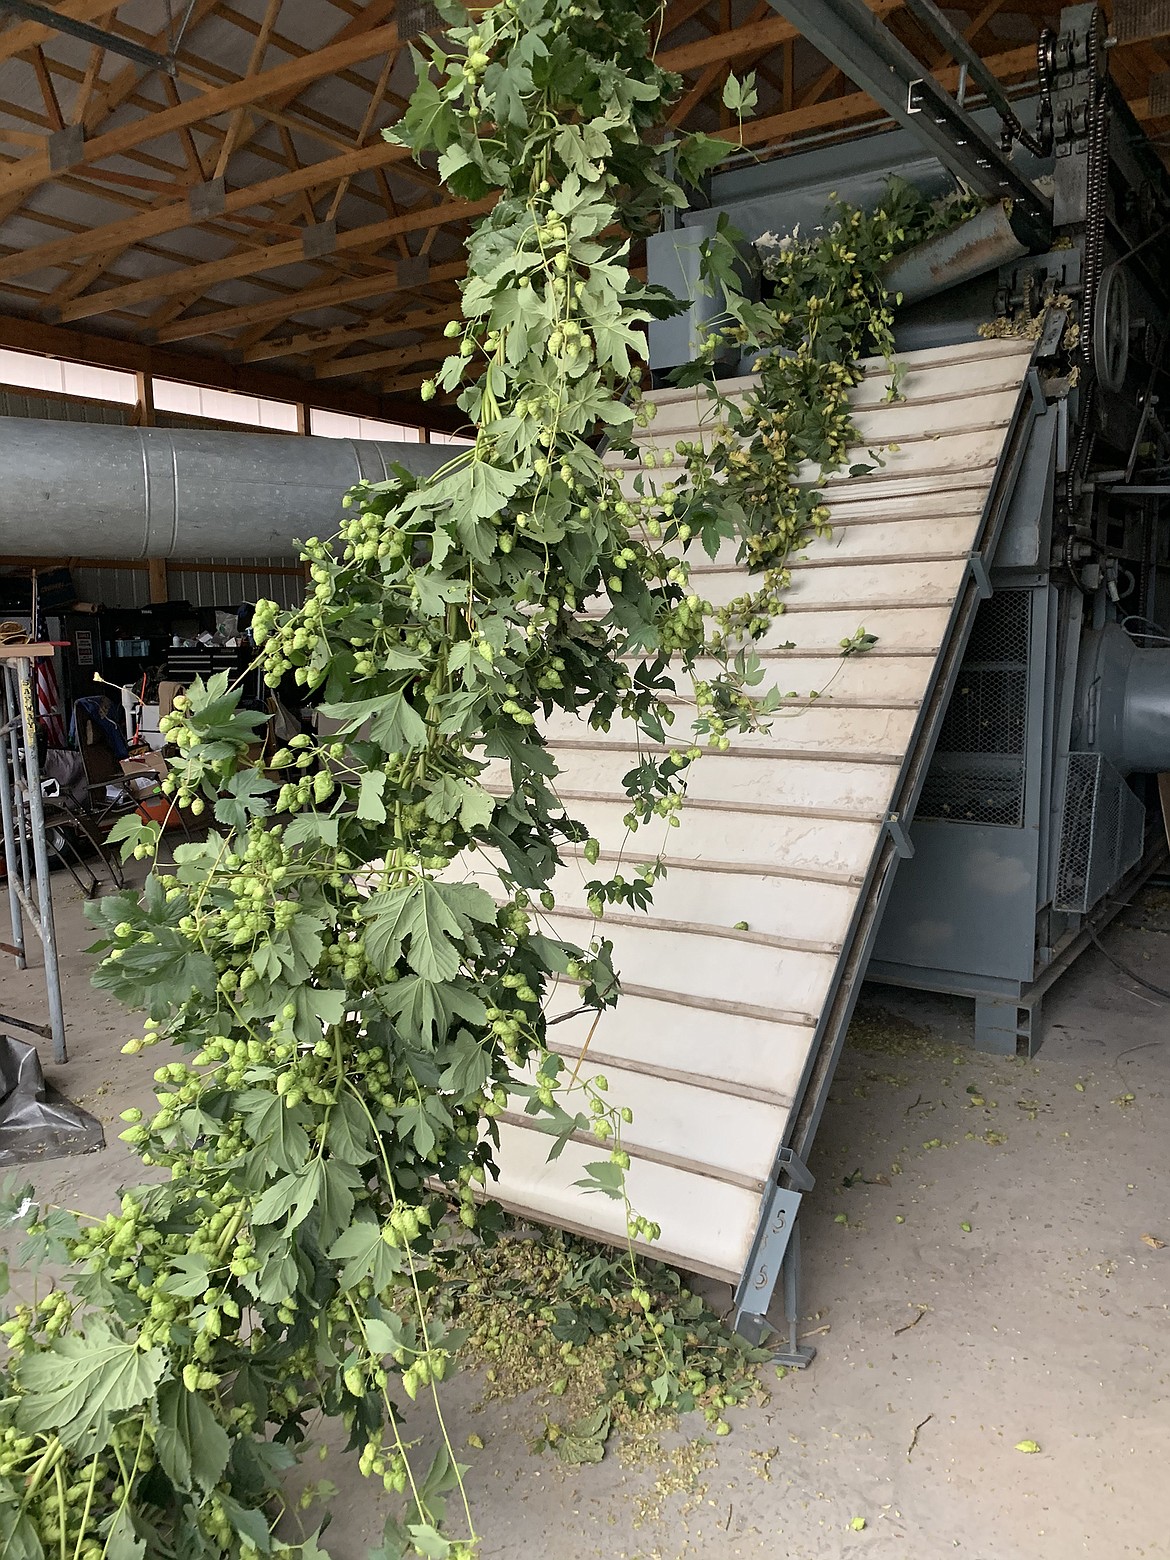 The 18-foot long hops plants are fed through the processor to separate the flowers from the rest of the plant.